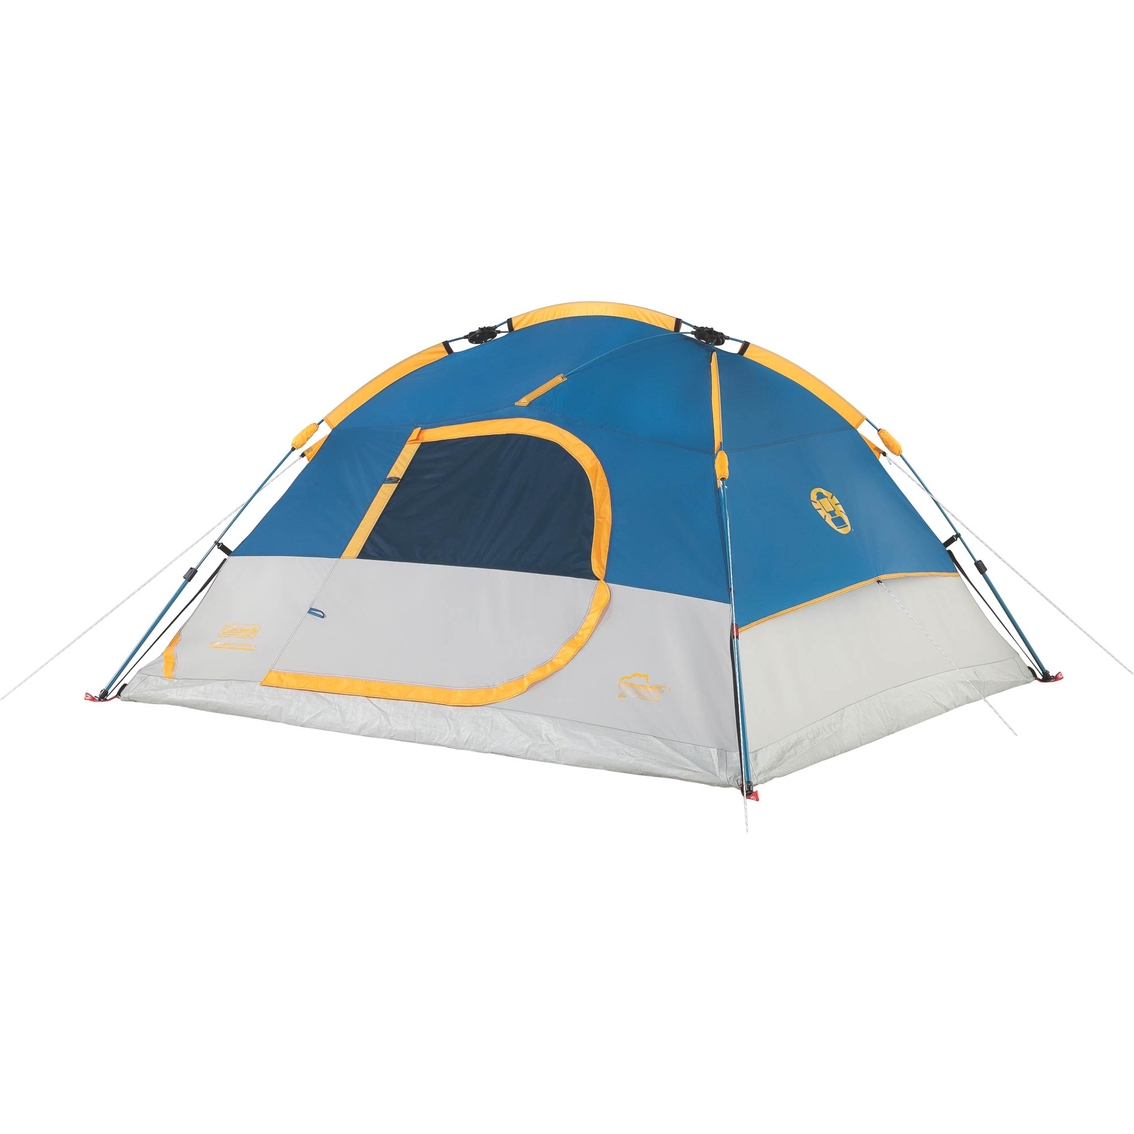 Coleman Flatiron 4 Person Instant Dome Tent | Tents | Sports 